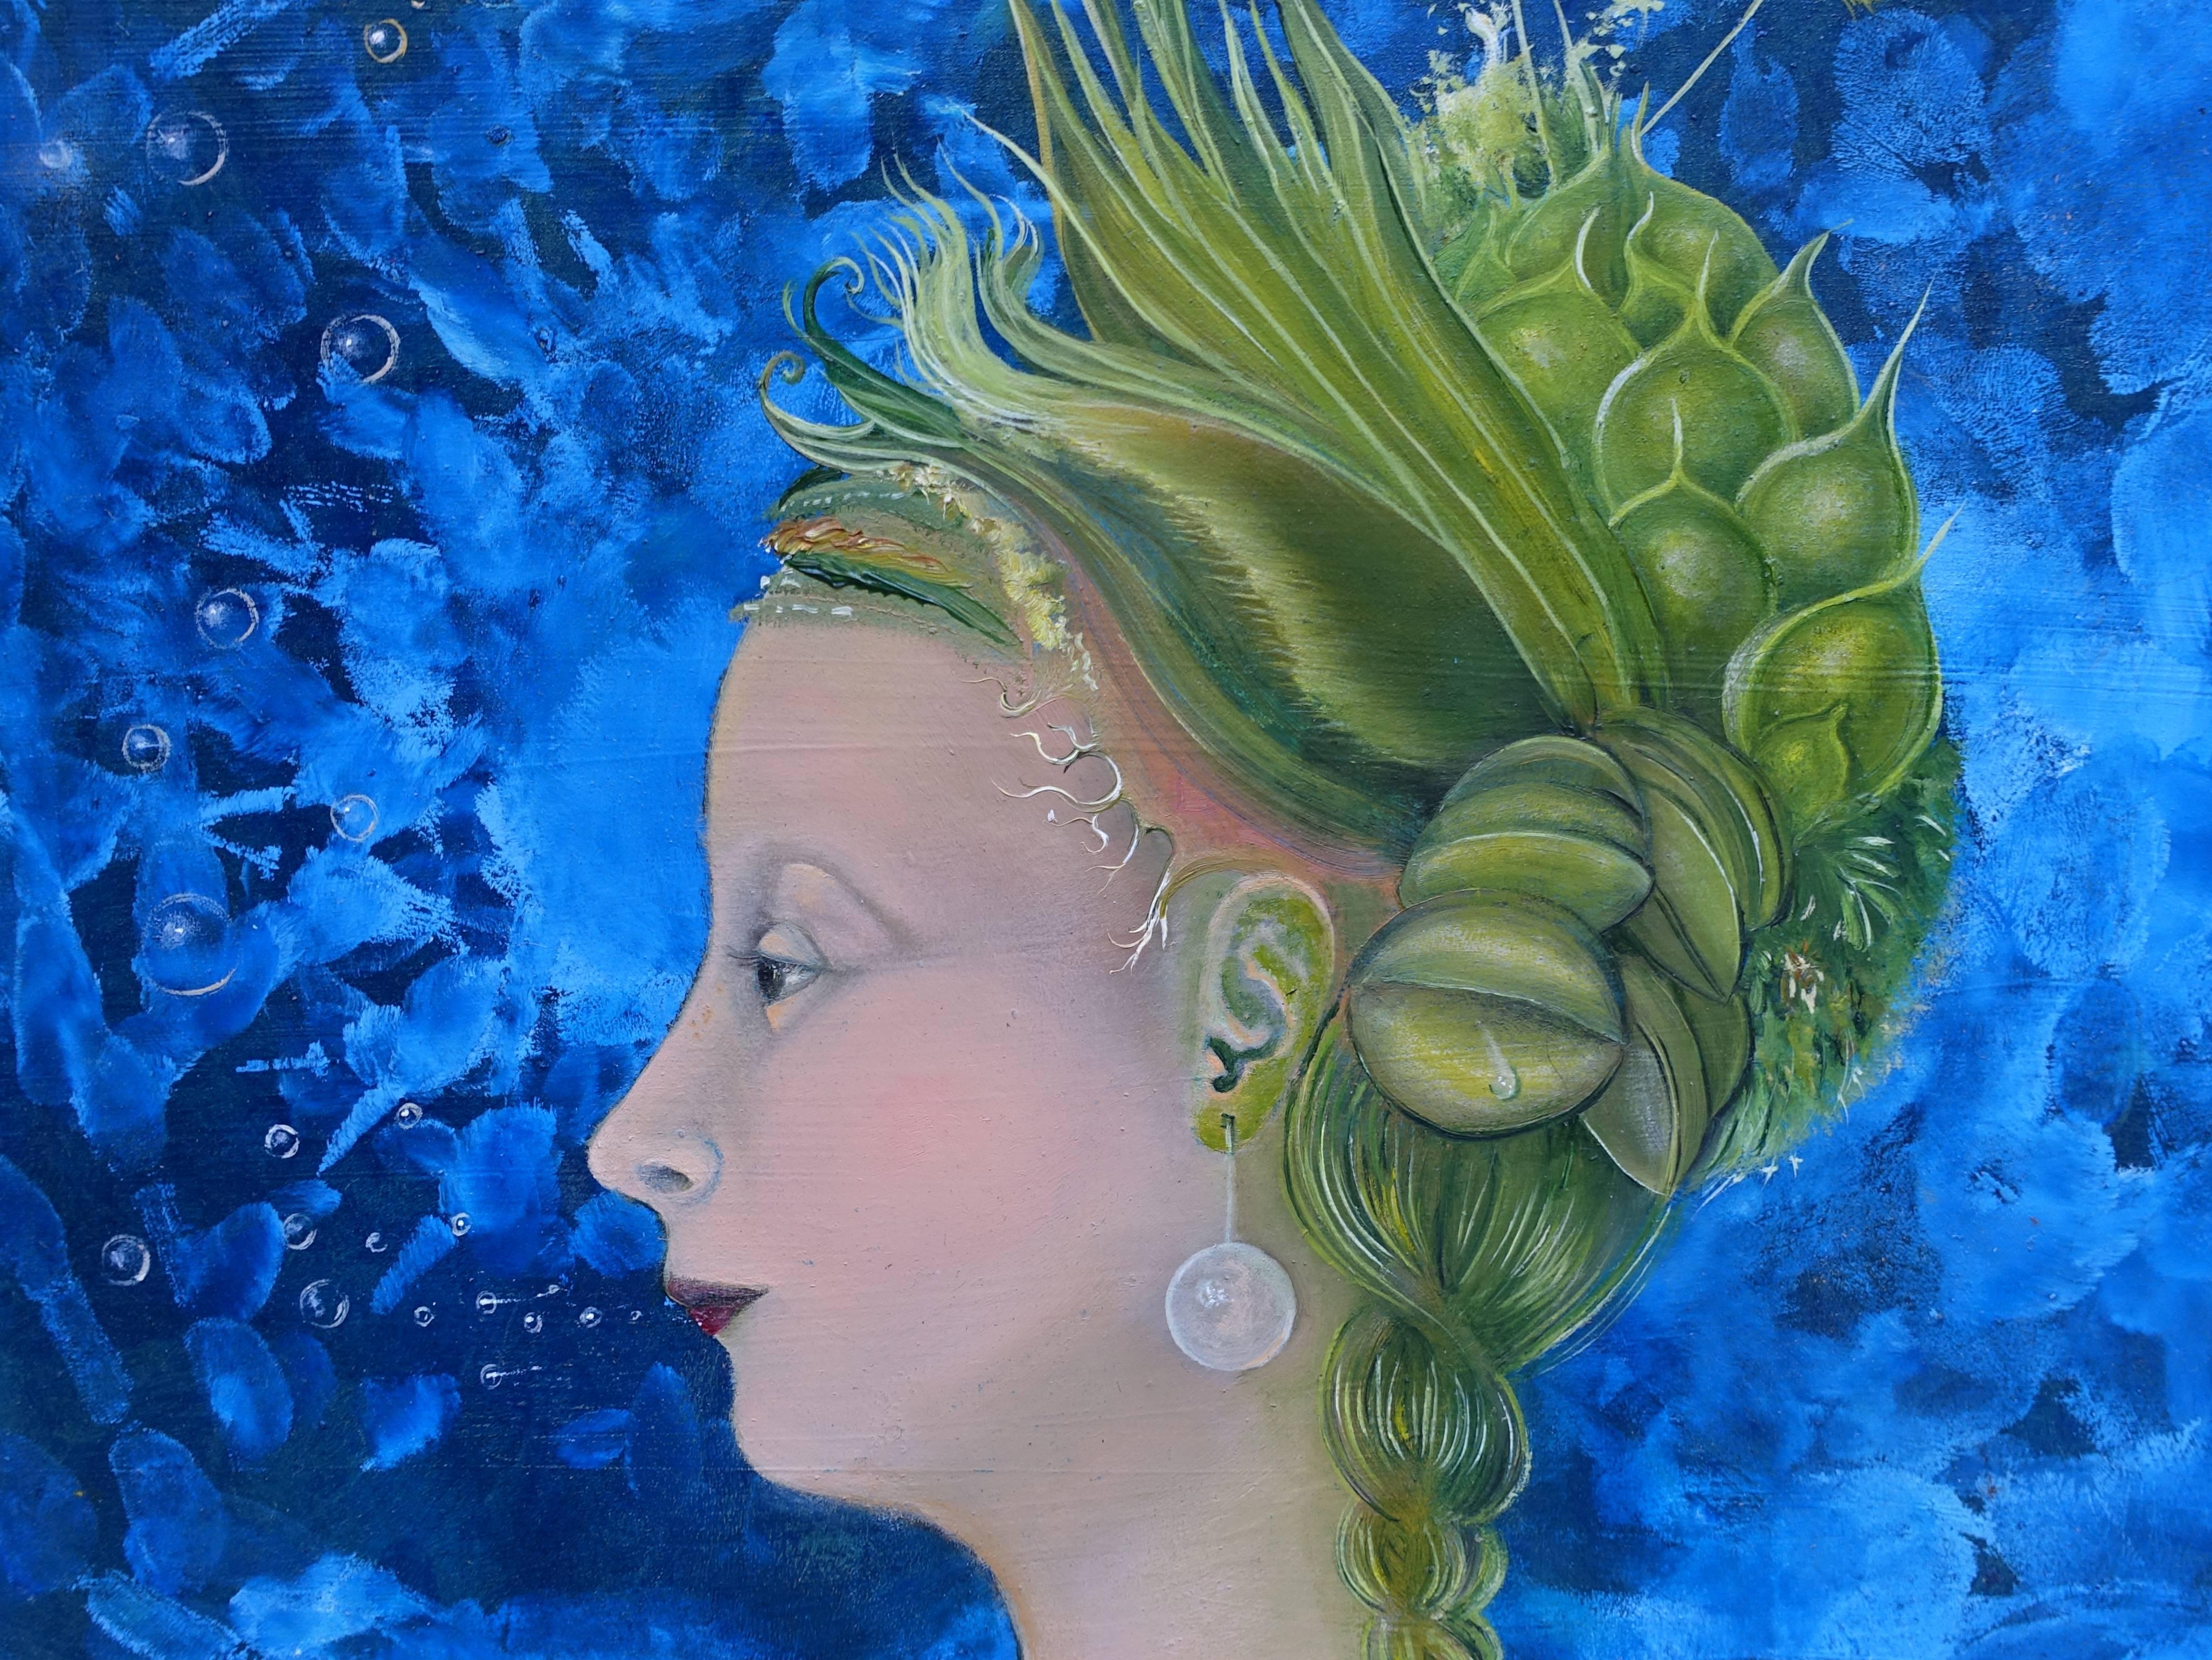 Woman with Plants on her Mind - Painting by Maike Kreichgauer